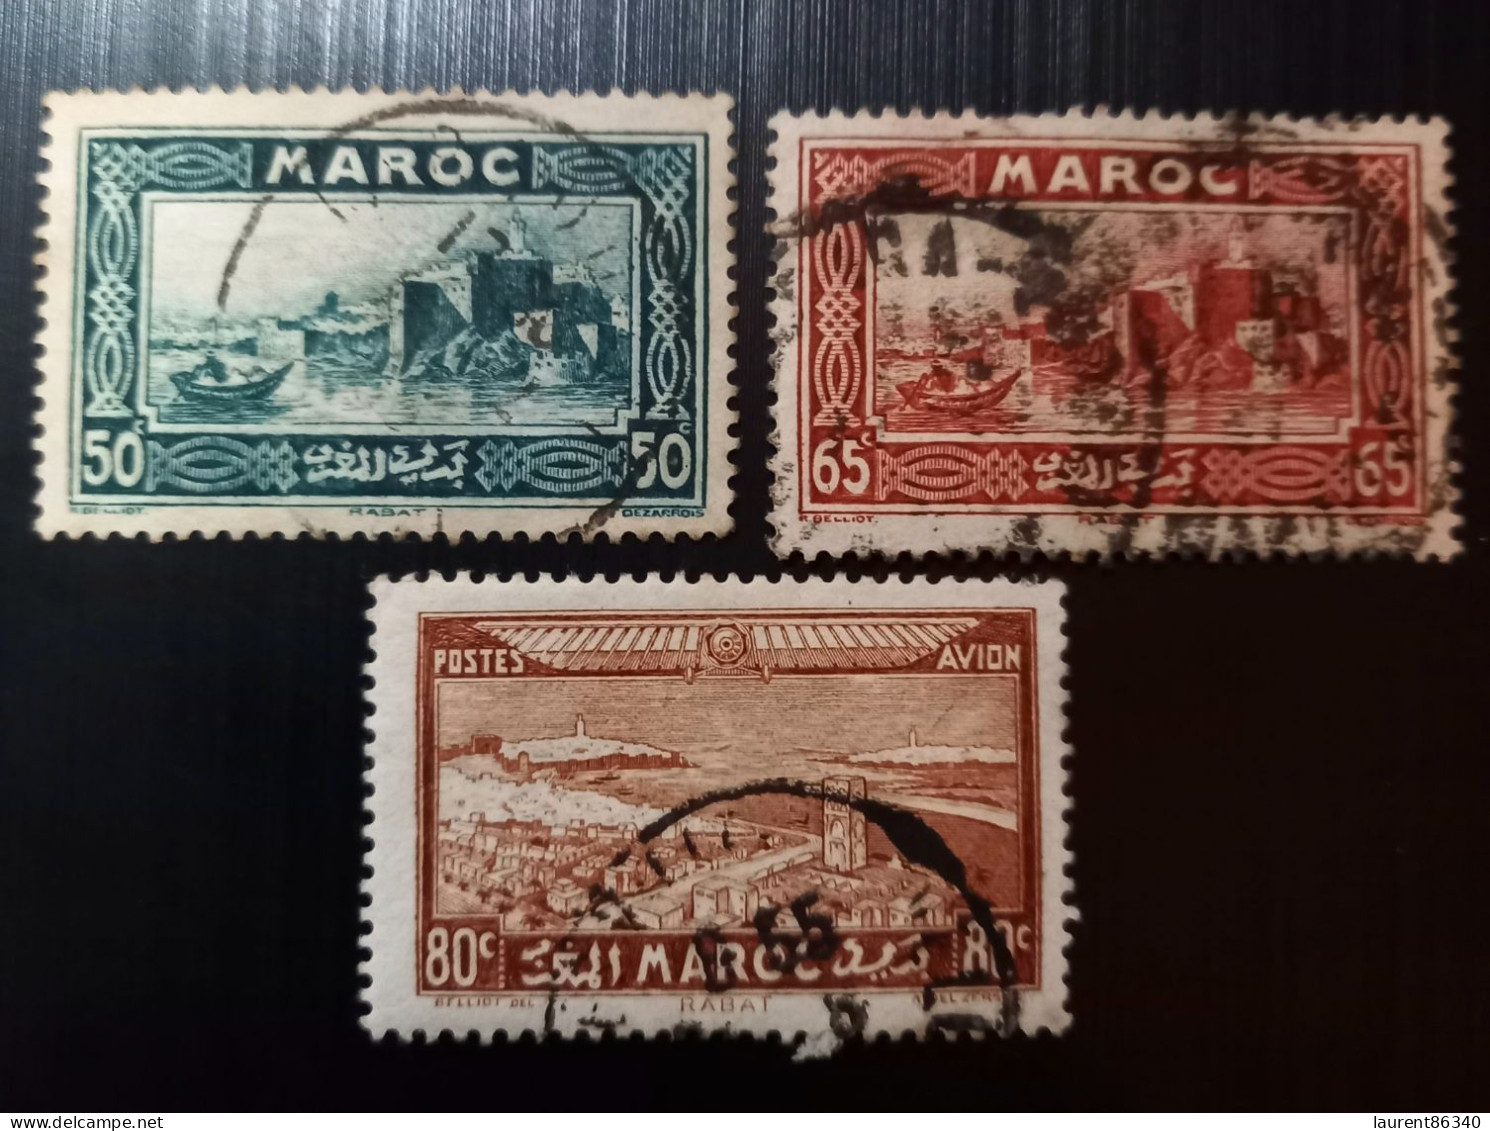 Maroc 1933 Local Motives & 1933 Airmail - Views Of The City  Modèle: R. Beliot Gravure: Del Rieu Lot 1 - Used Stamps